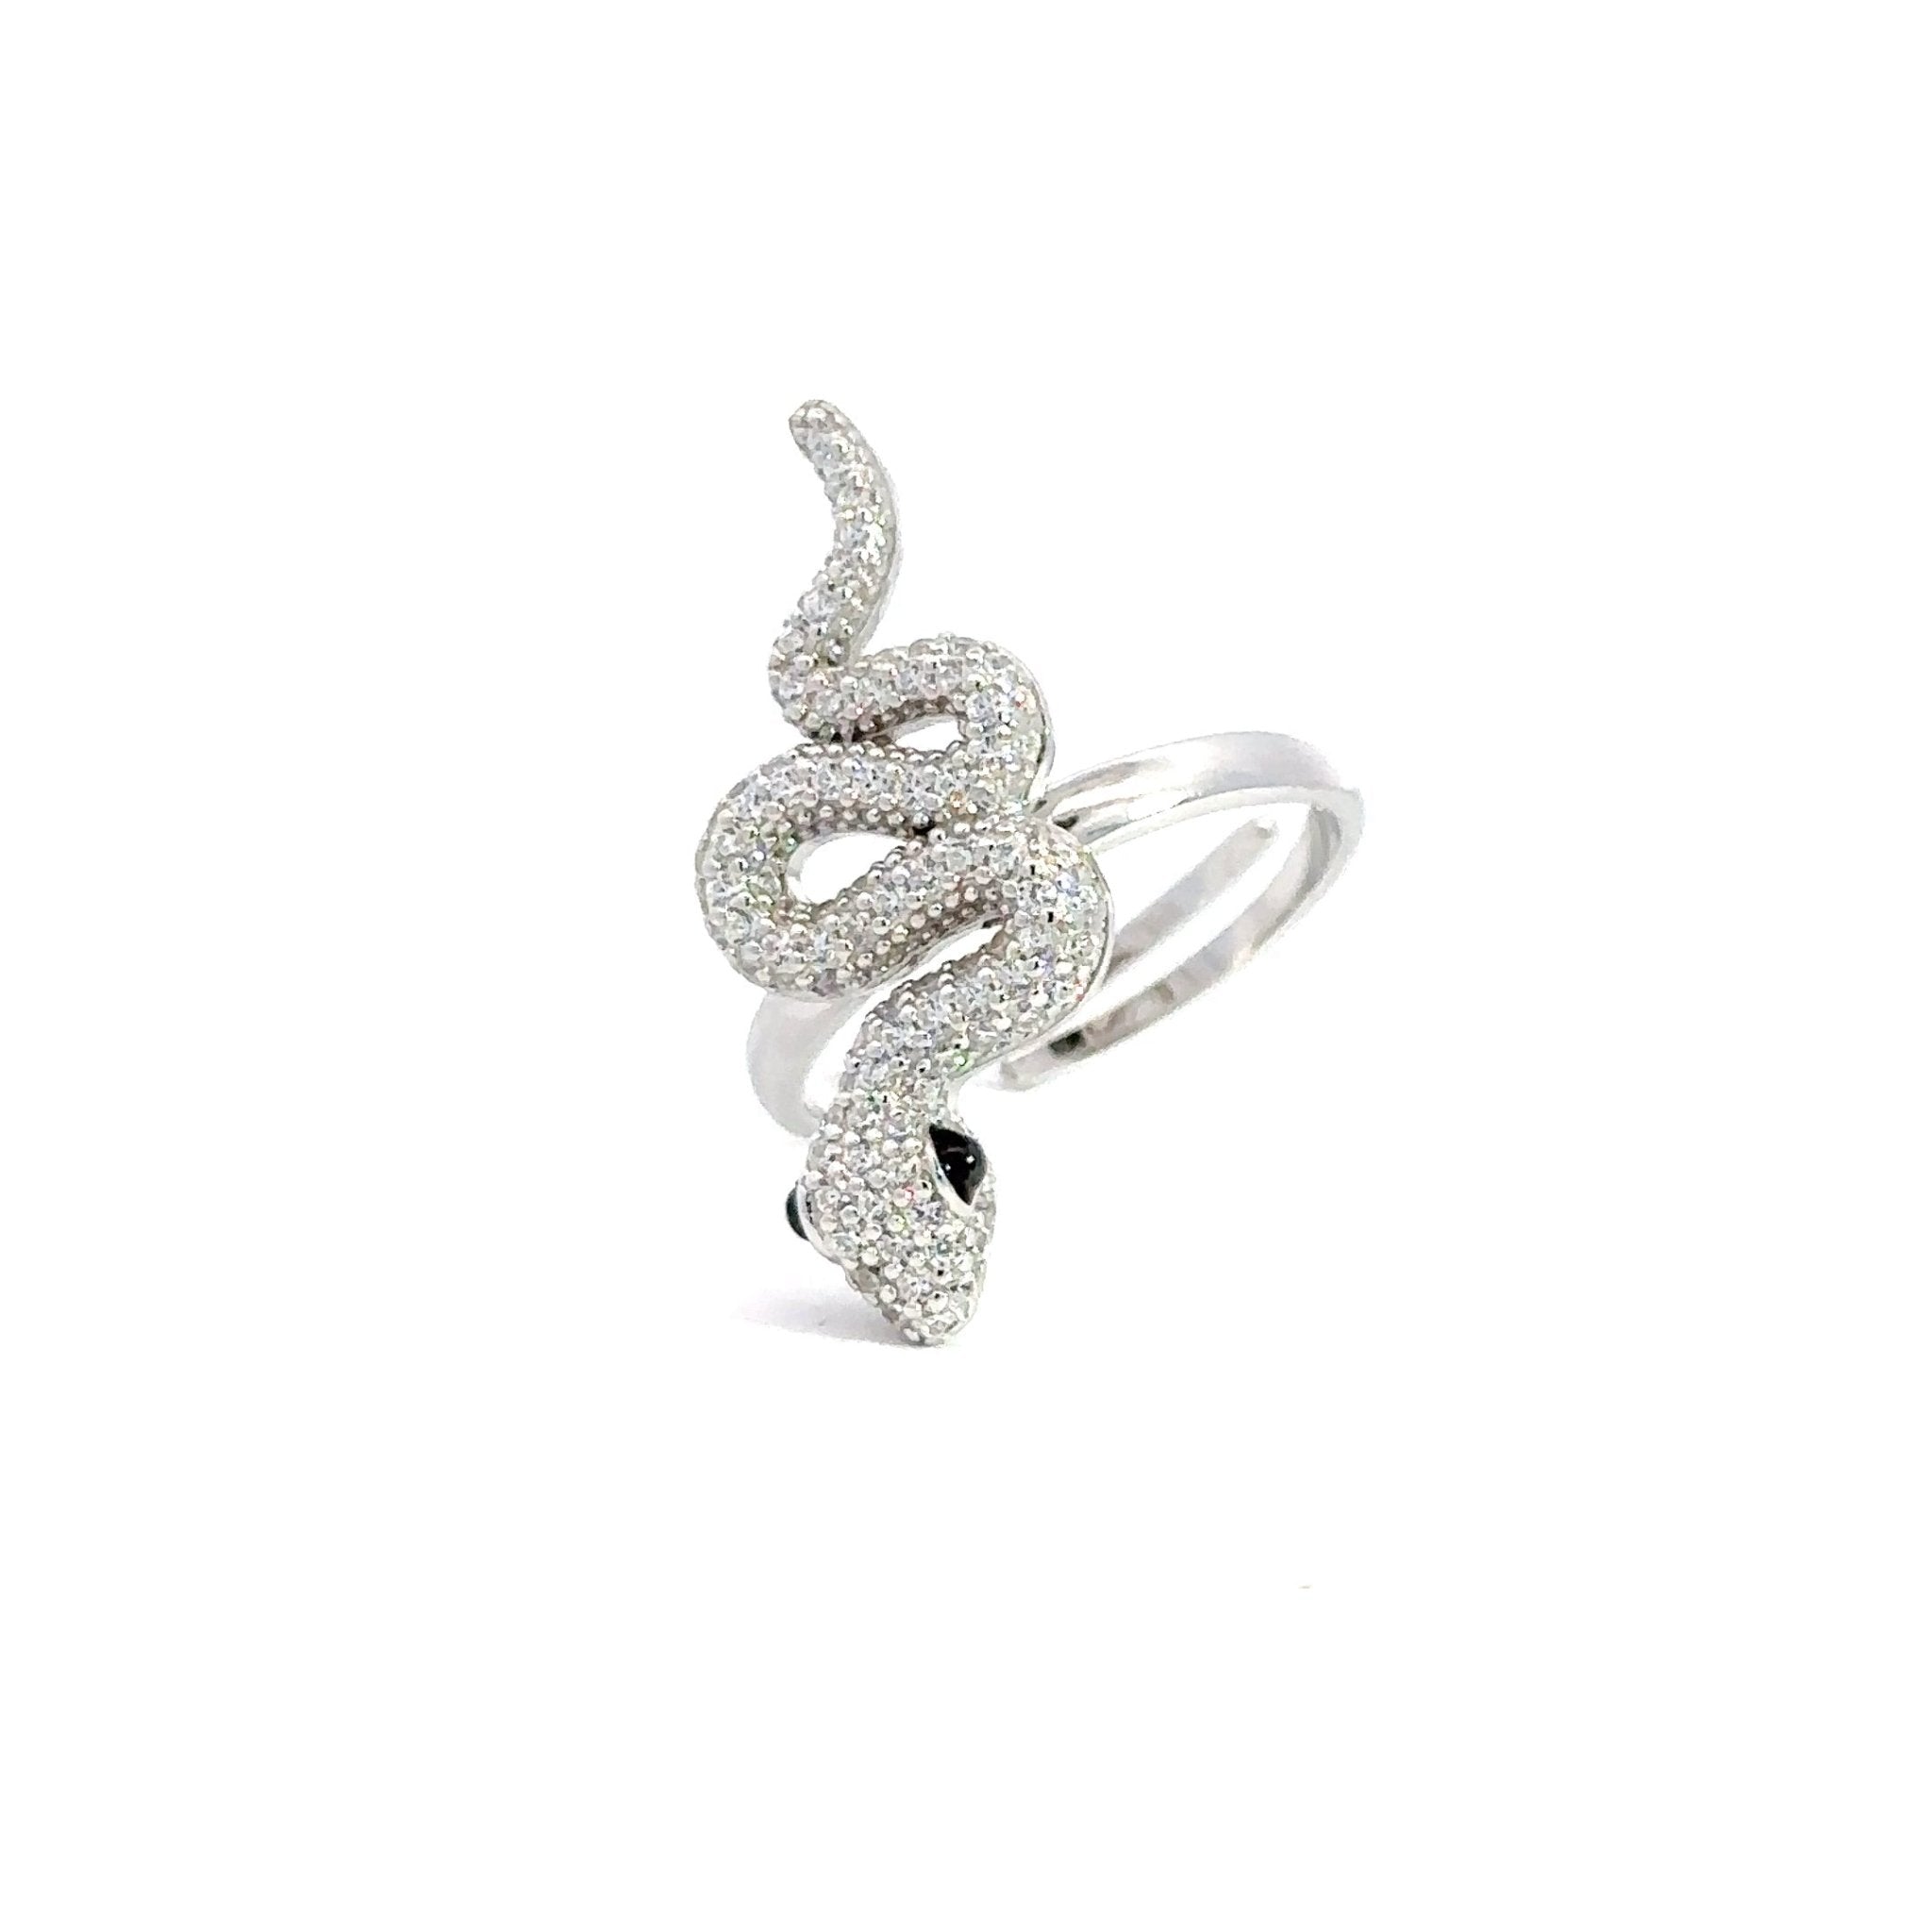 White Serpent Silver Ring by Natkina